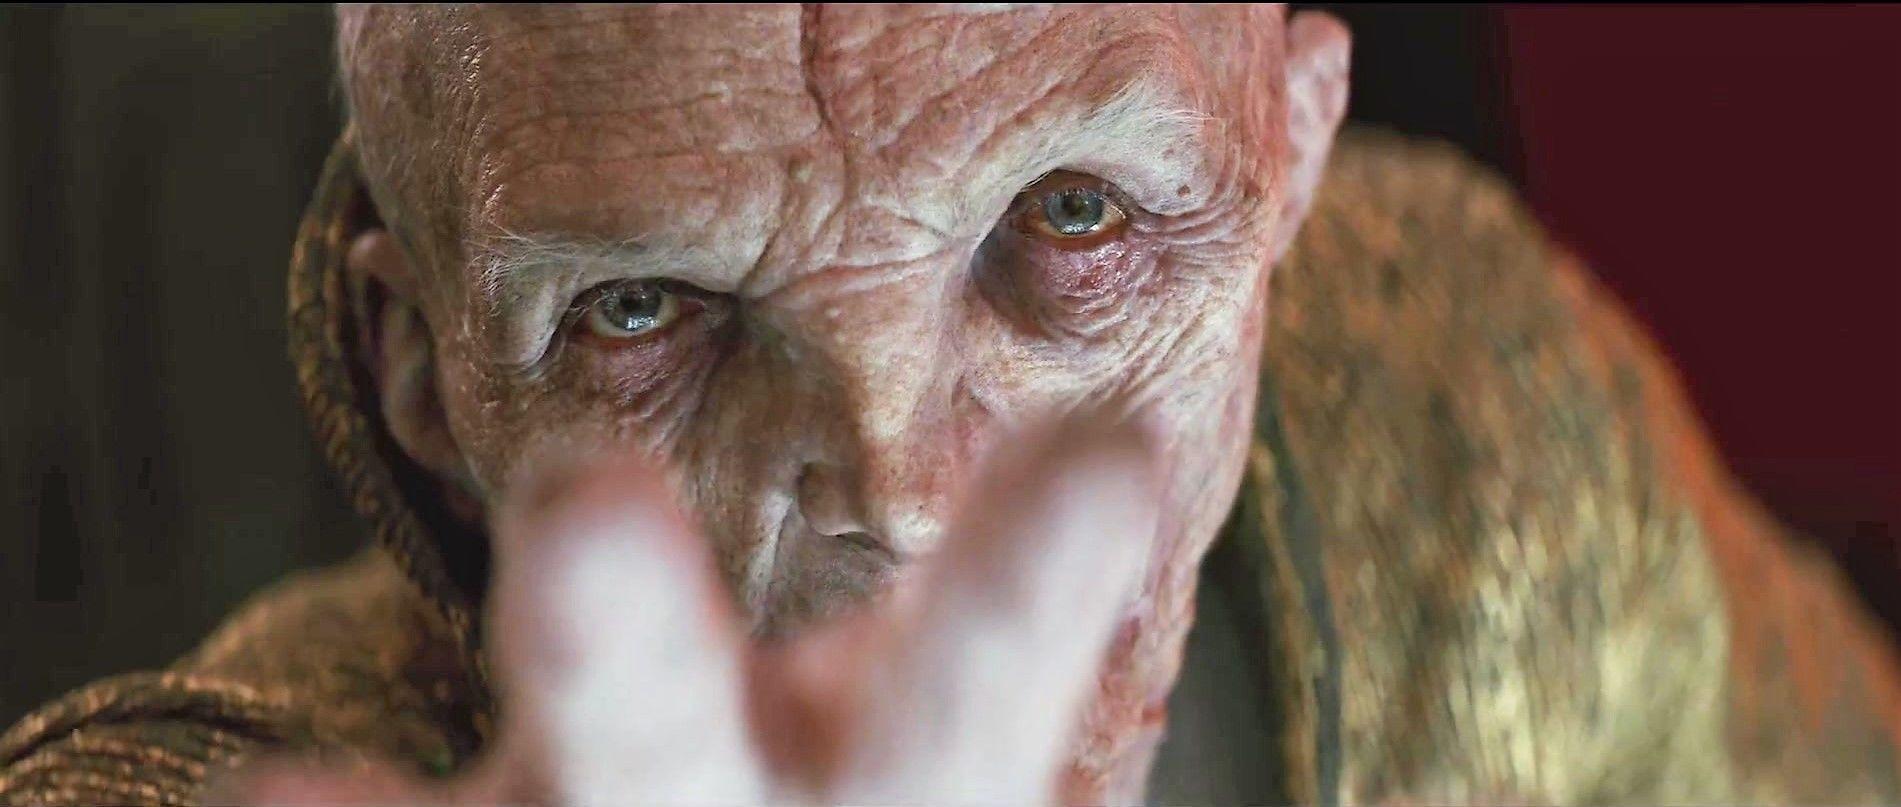 The Last Jedi: Image of Snoke's throne room surface